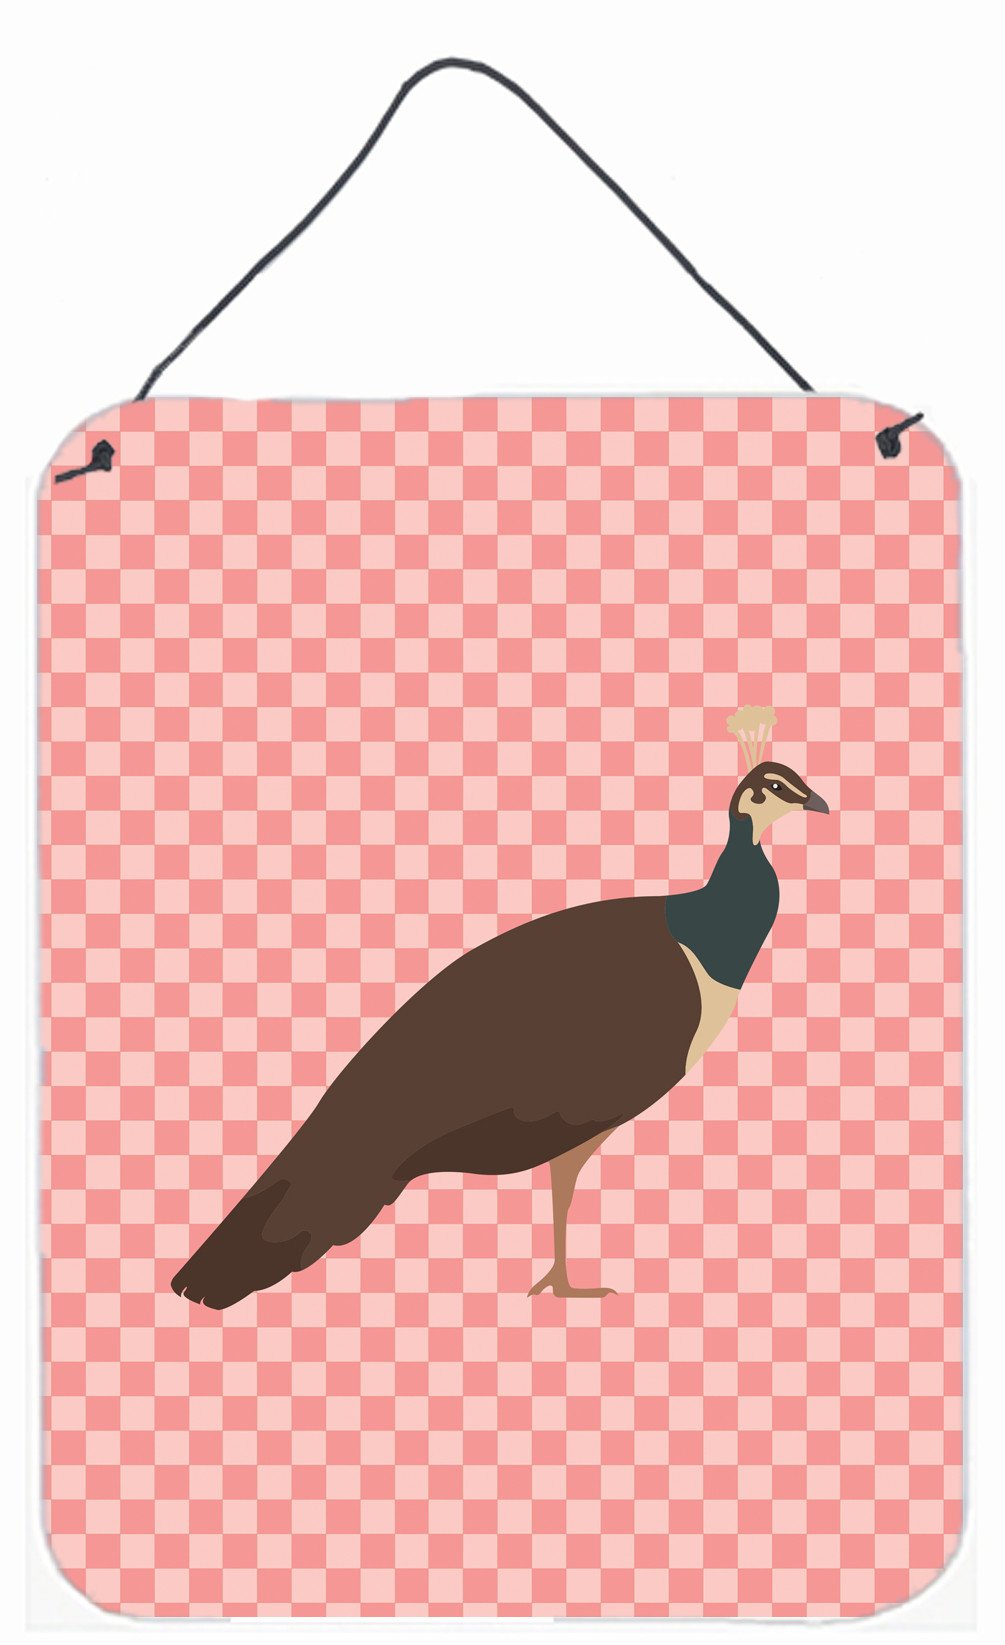 Indian Peahen Peafowl Pink Check Wall or Door Hanging Prints BB7927DS1216 by Caroline's Treasures